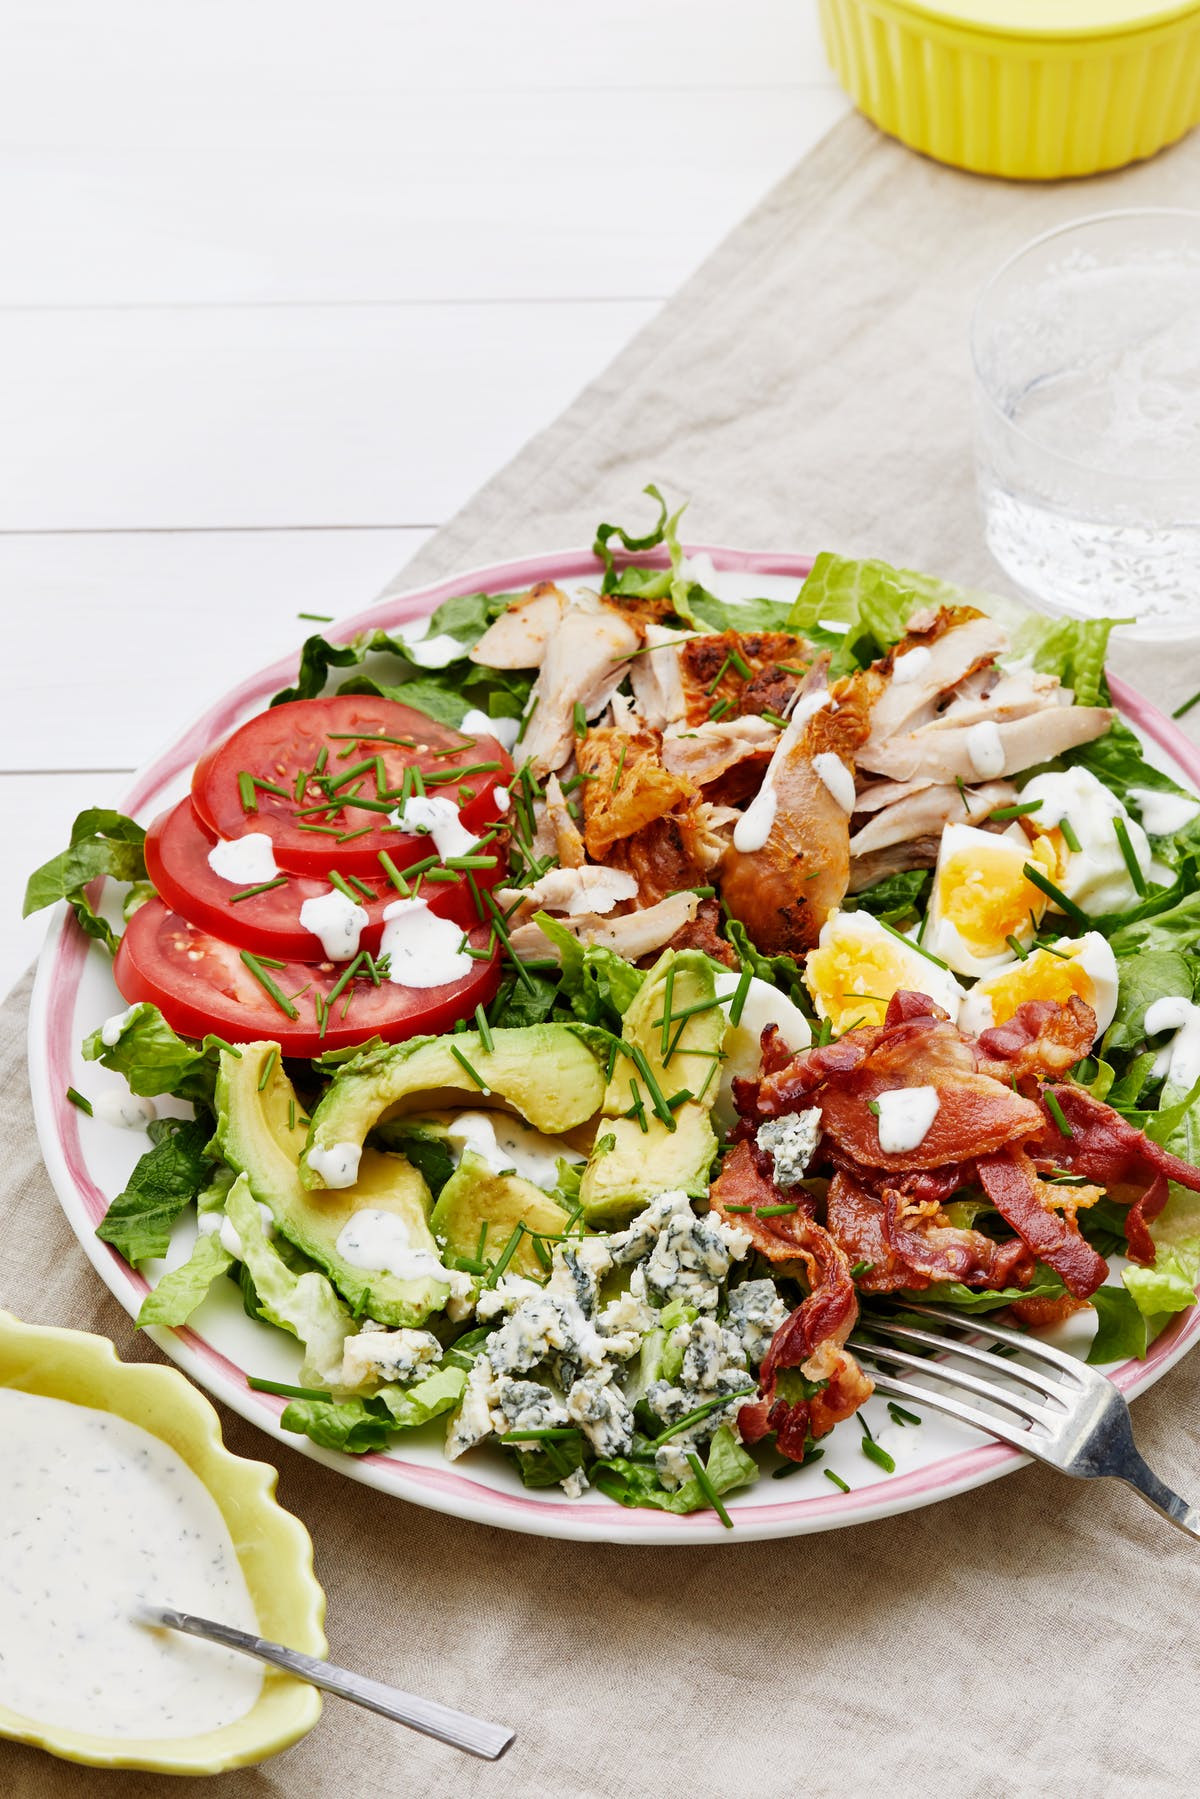 Best Salad Dressings For Diets
 Keto Cobb Salad with Ranch Dressing — Recipe — Diet Doctor